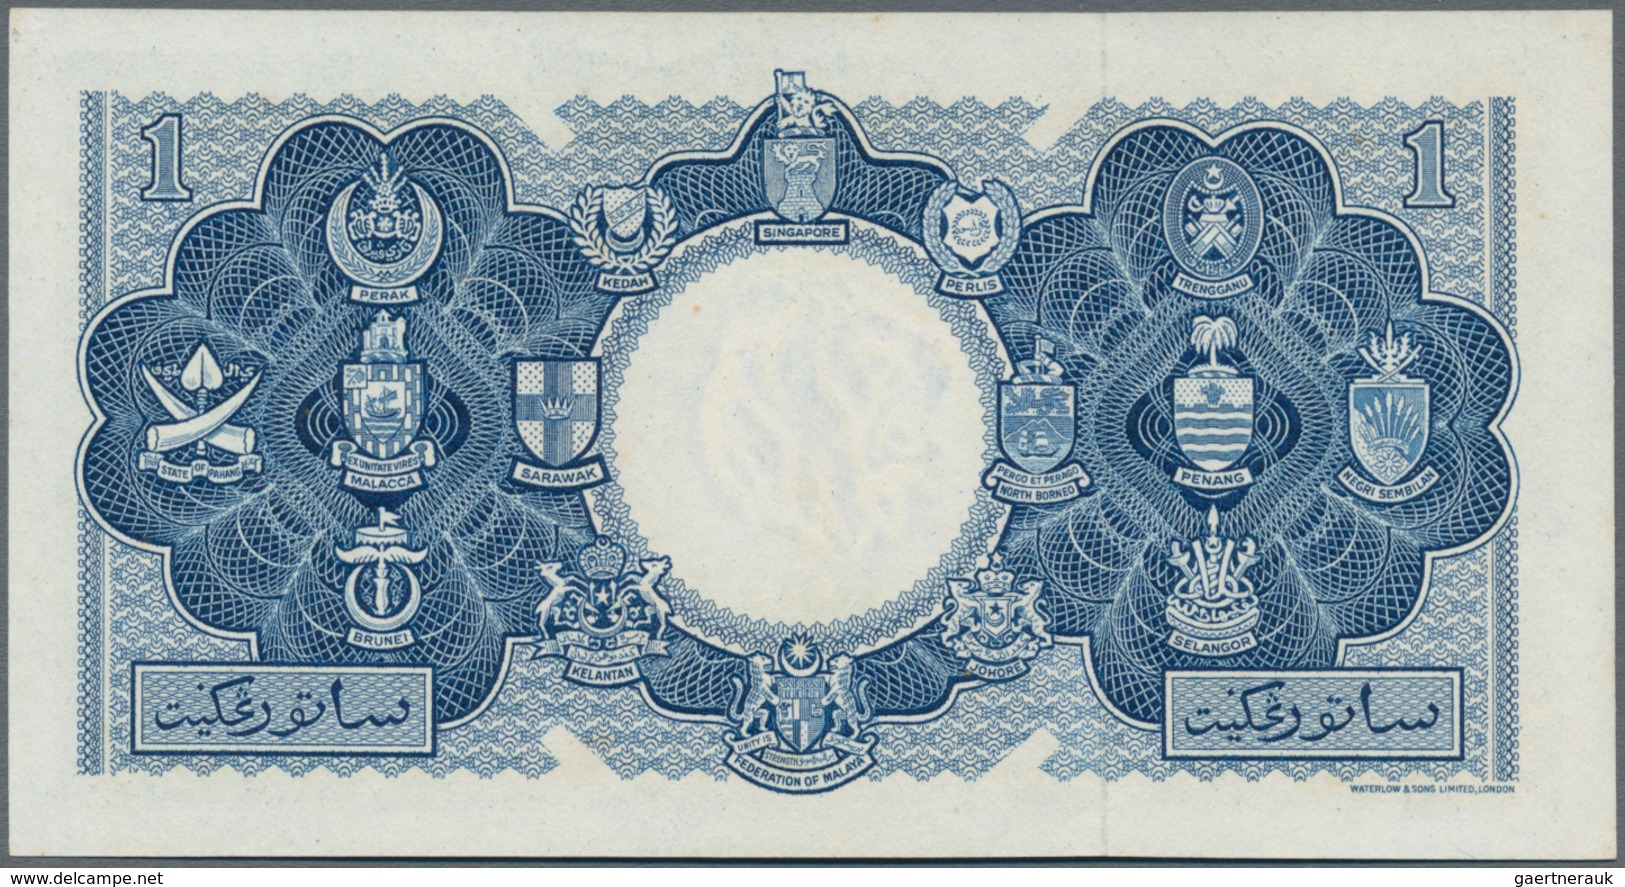 Malaya & British Borneo: Board Of Commissioners Of Currency Set With 3 Banknotes Of The 1953 Series - Malaysie